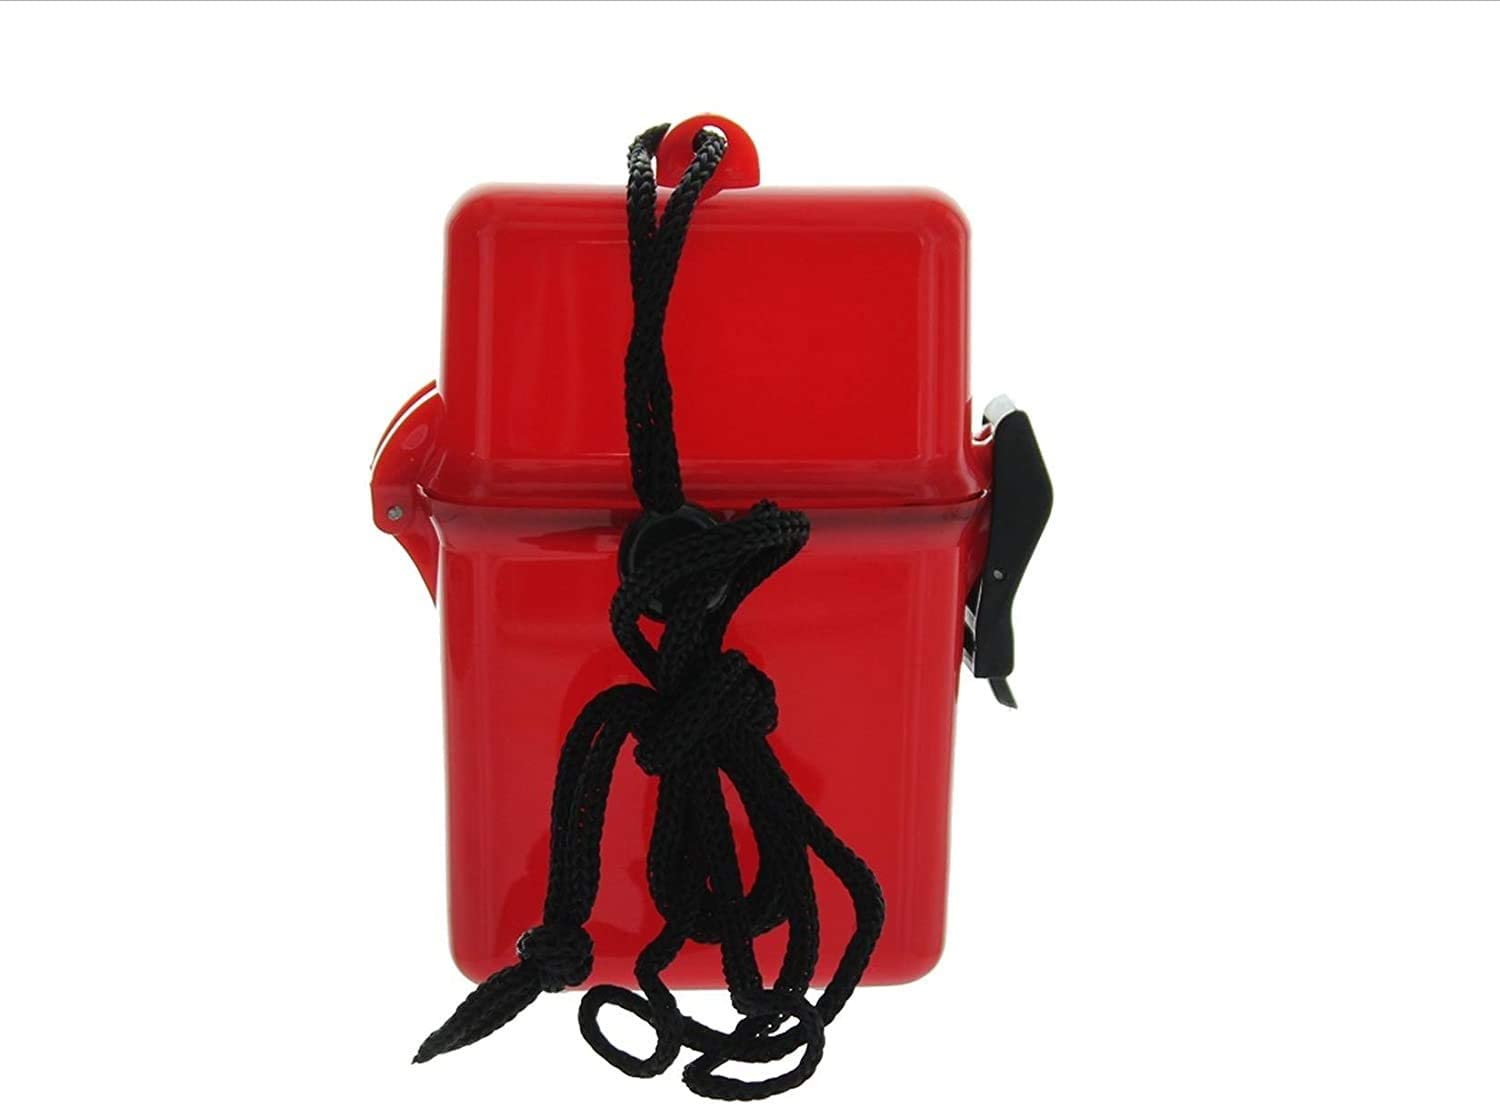 Readi USA Red Waterproof (Spills Splashes) Dry Box Case- Beach, Boat & Pool - Money, ID, Key's Cigarettes N More - Travel Camping Hiking Geocache